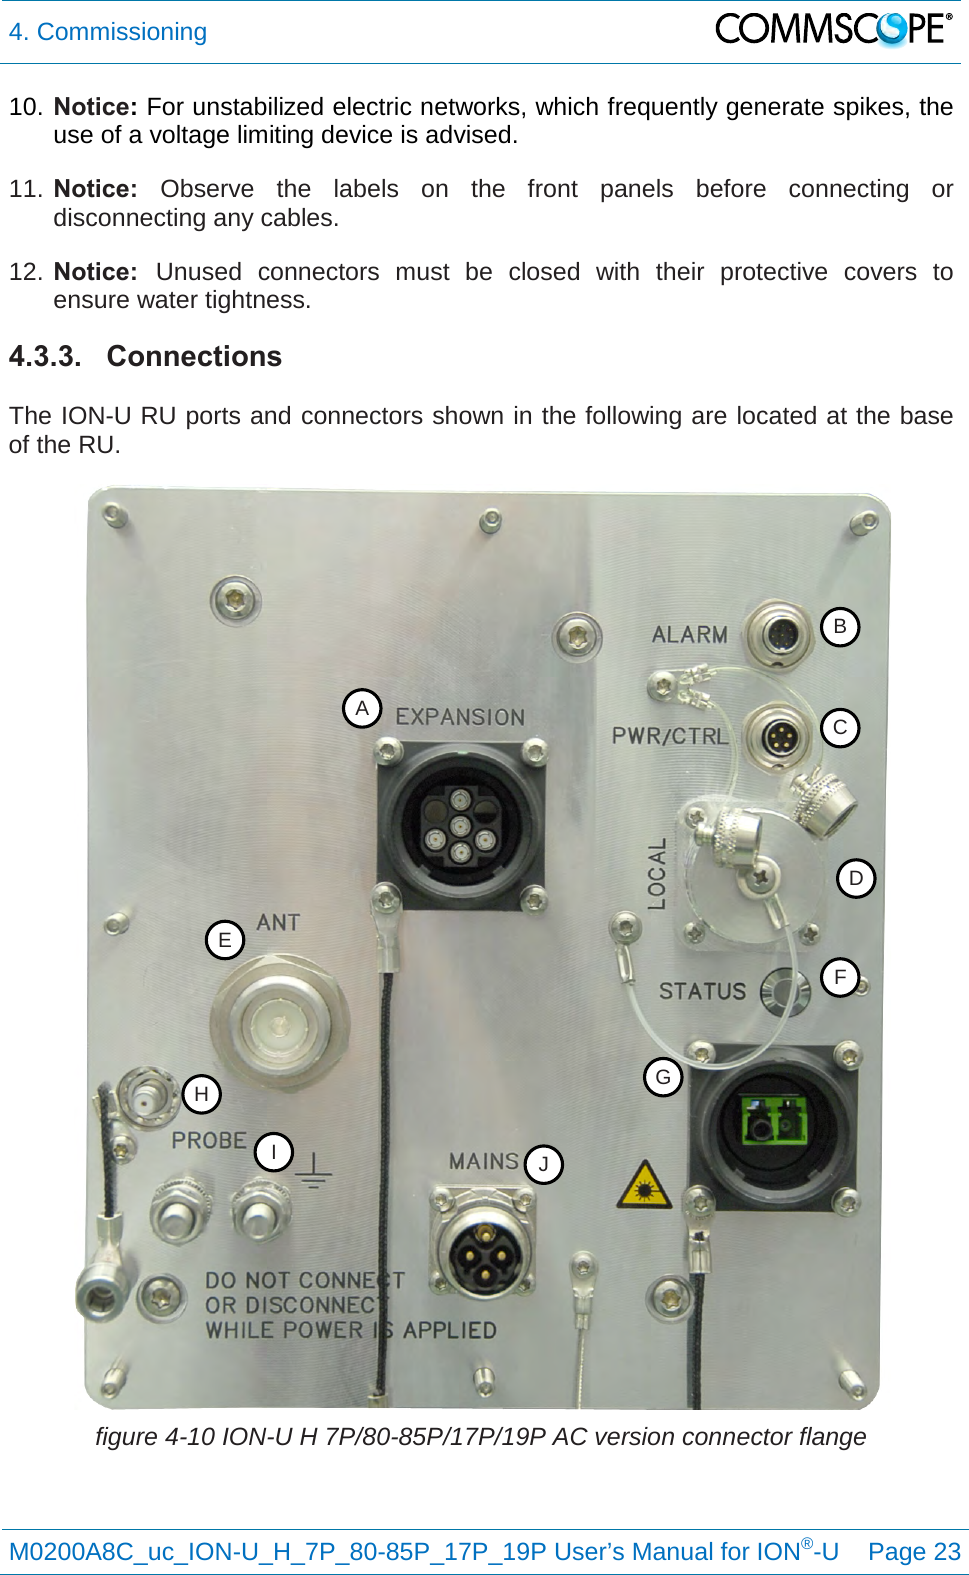 4. Commissioning   M0200A8C_uc_ION-U_H_7P_80-85P_17P_19P User’s Manual for ION®-U  Page 23  10. Notice: For unstabilized electric networks, which frequently generate spikes, the use of a voltage limiting device is advised. 11. Notice: Observe the labels on the front panels before connecting or disconnecting any cables. 12. Notice: Unused connectors must be closed with their protective covers to ensure water tightness. 4.3.3. Connections  The ION-U RU ports and connectors shown in the following are located at the base of the RU.  figure 4-10 ION-U H 7P/80-85P/17P/19P AC version connector flange    A B C D E F H G I J 